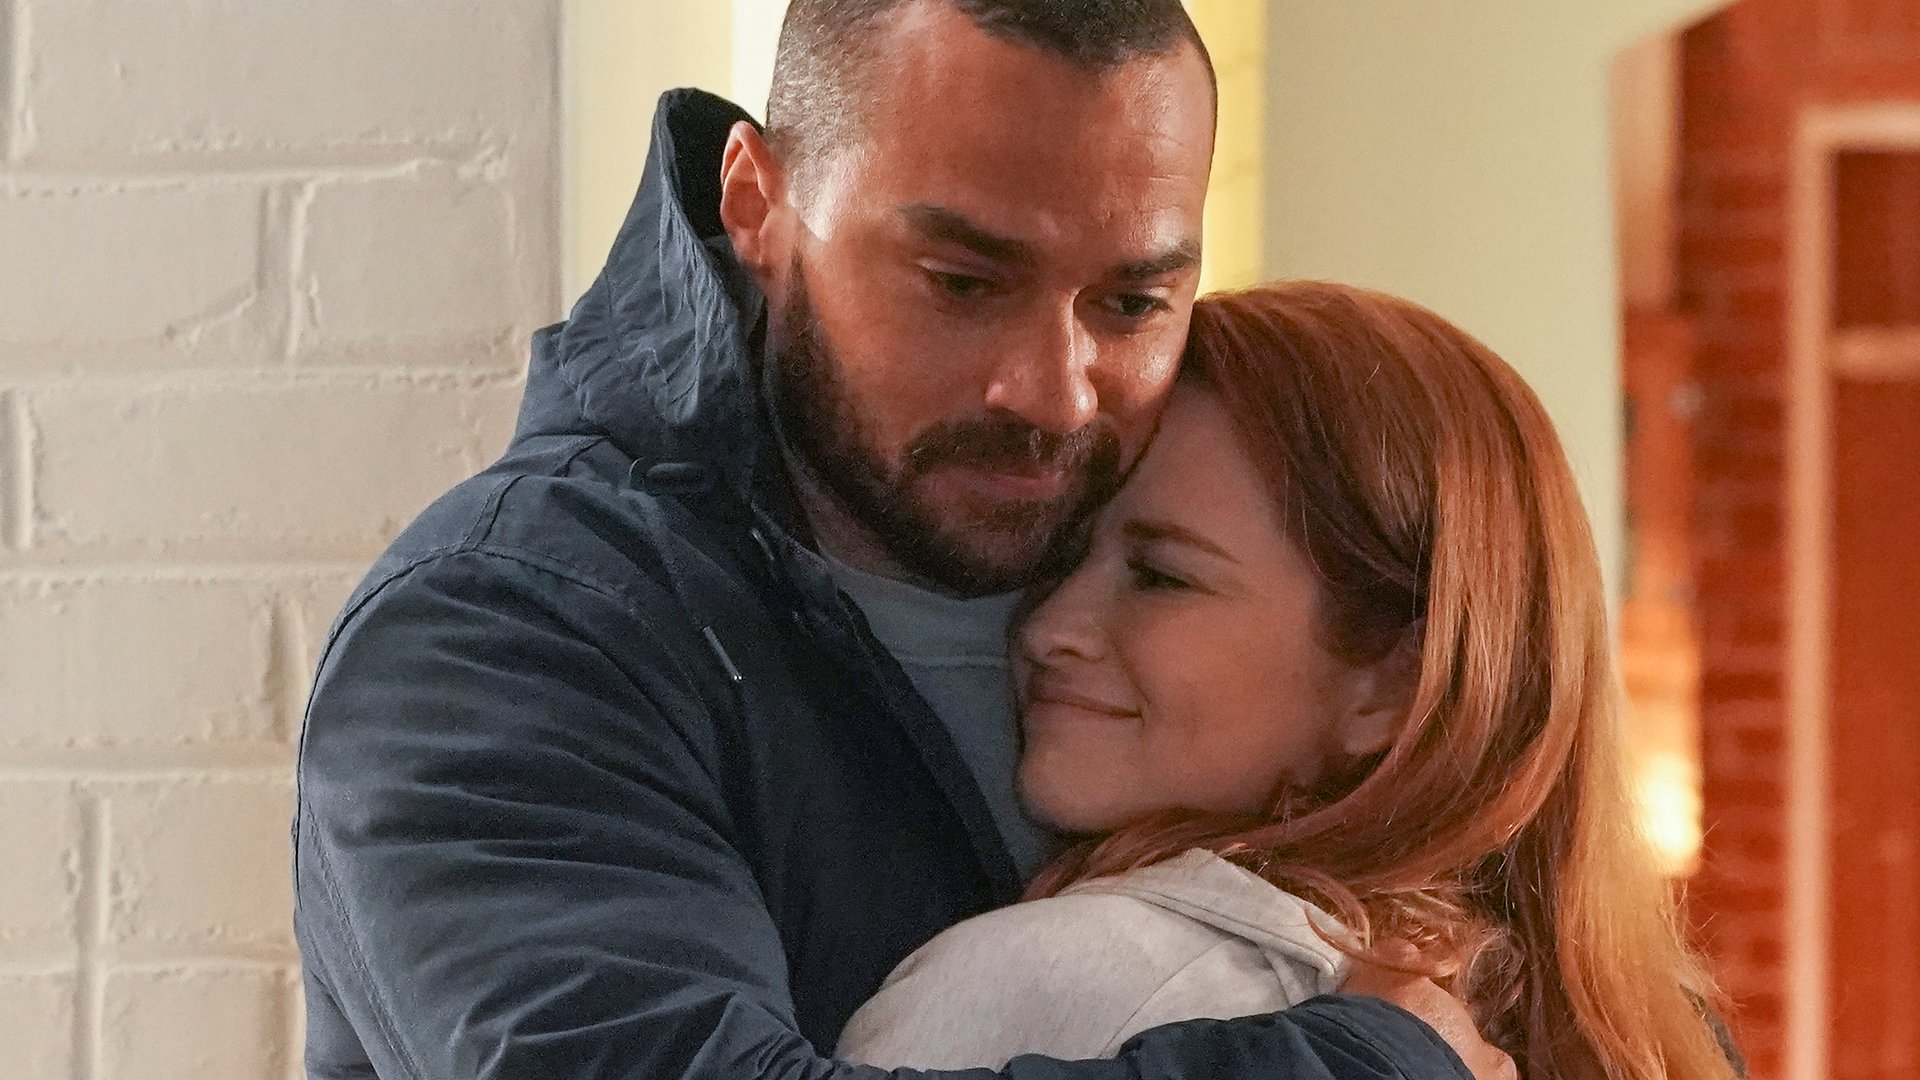 Jesse Williams as Jackson Avery and Sarah Drew as April Kepner hugging in ‘Grey’s Anatomy’ Season 17 Episode 14, ‘Look Up Child.’